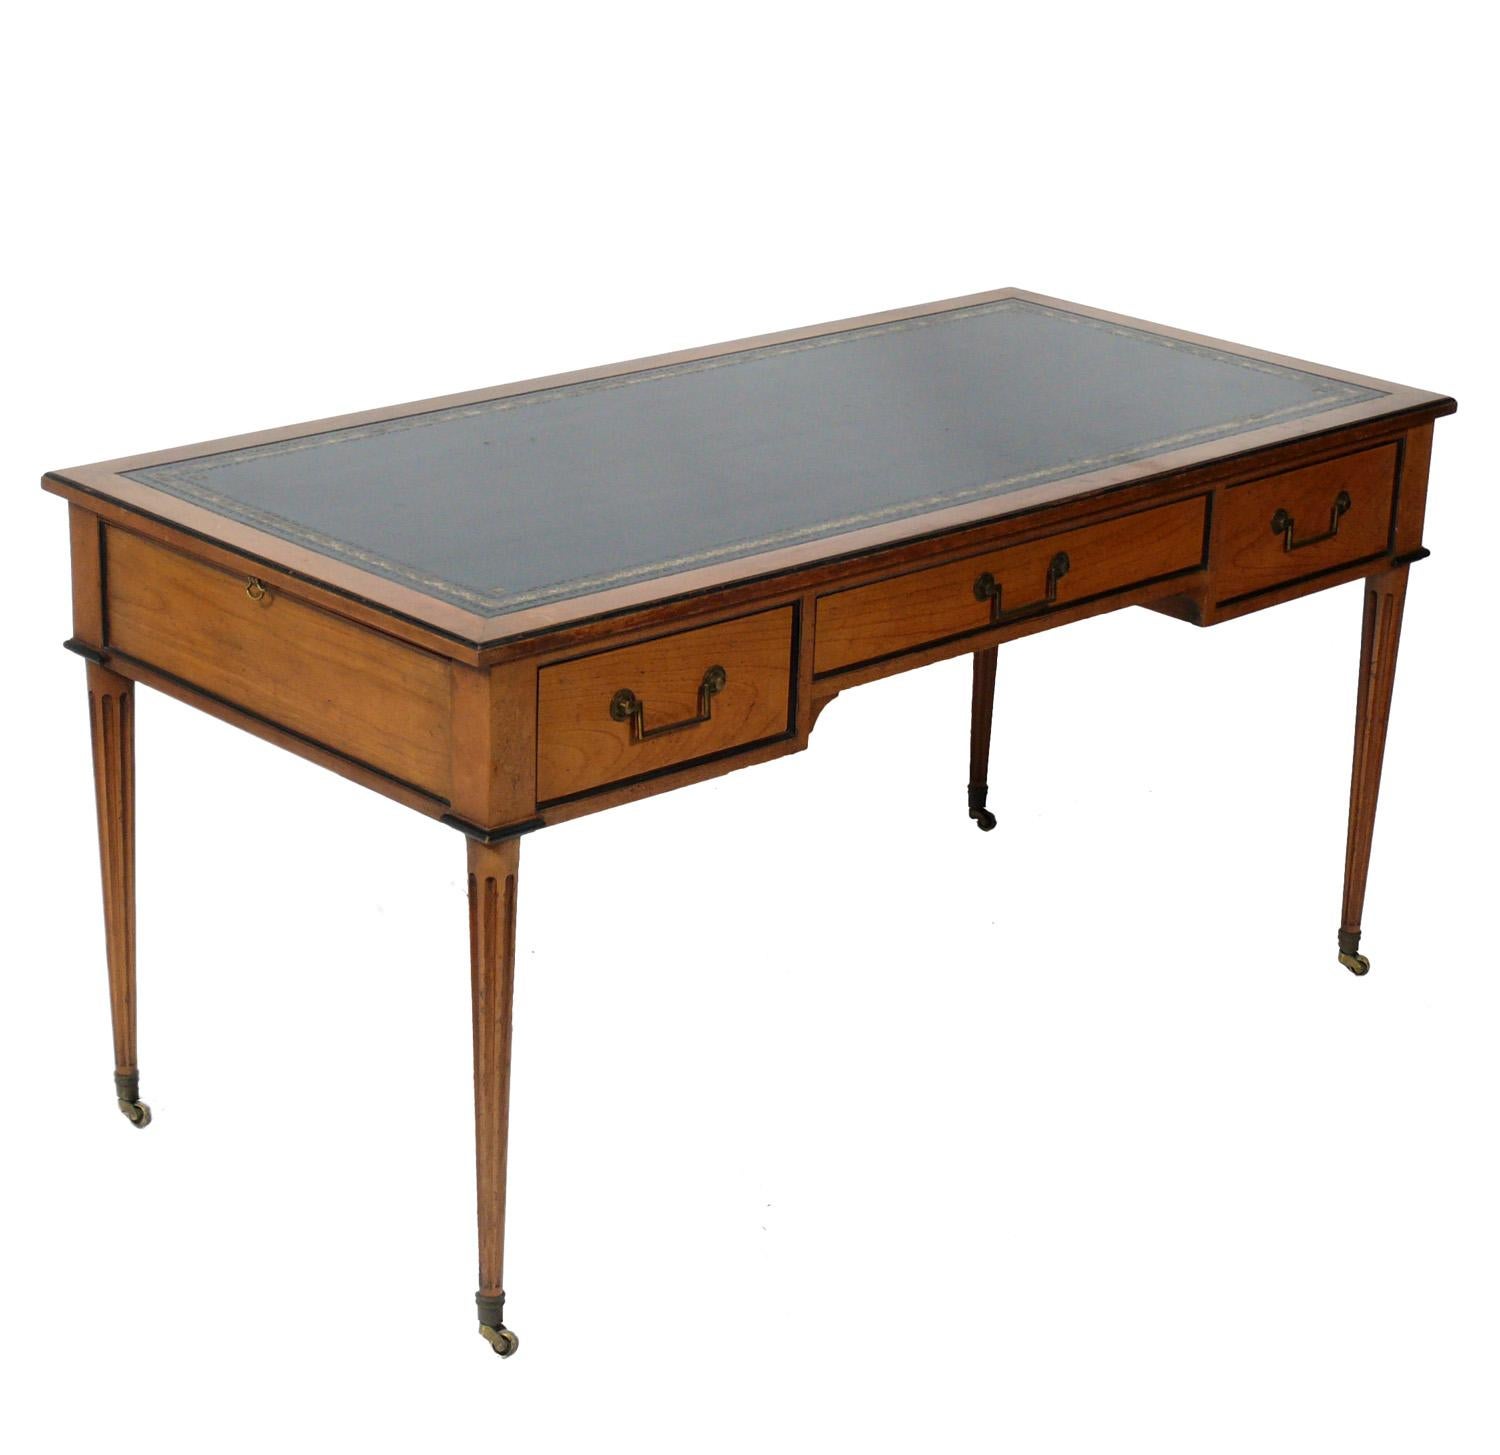 French style leather top Bureau plat or desk, made by Baker, American, circa 1960s. Retains wonderful original patina.